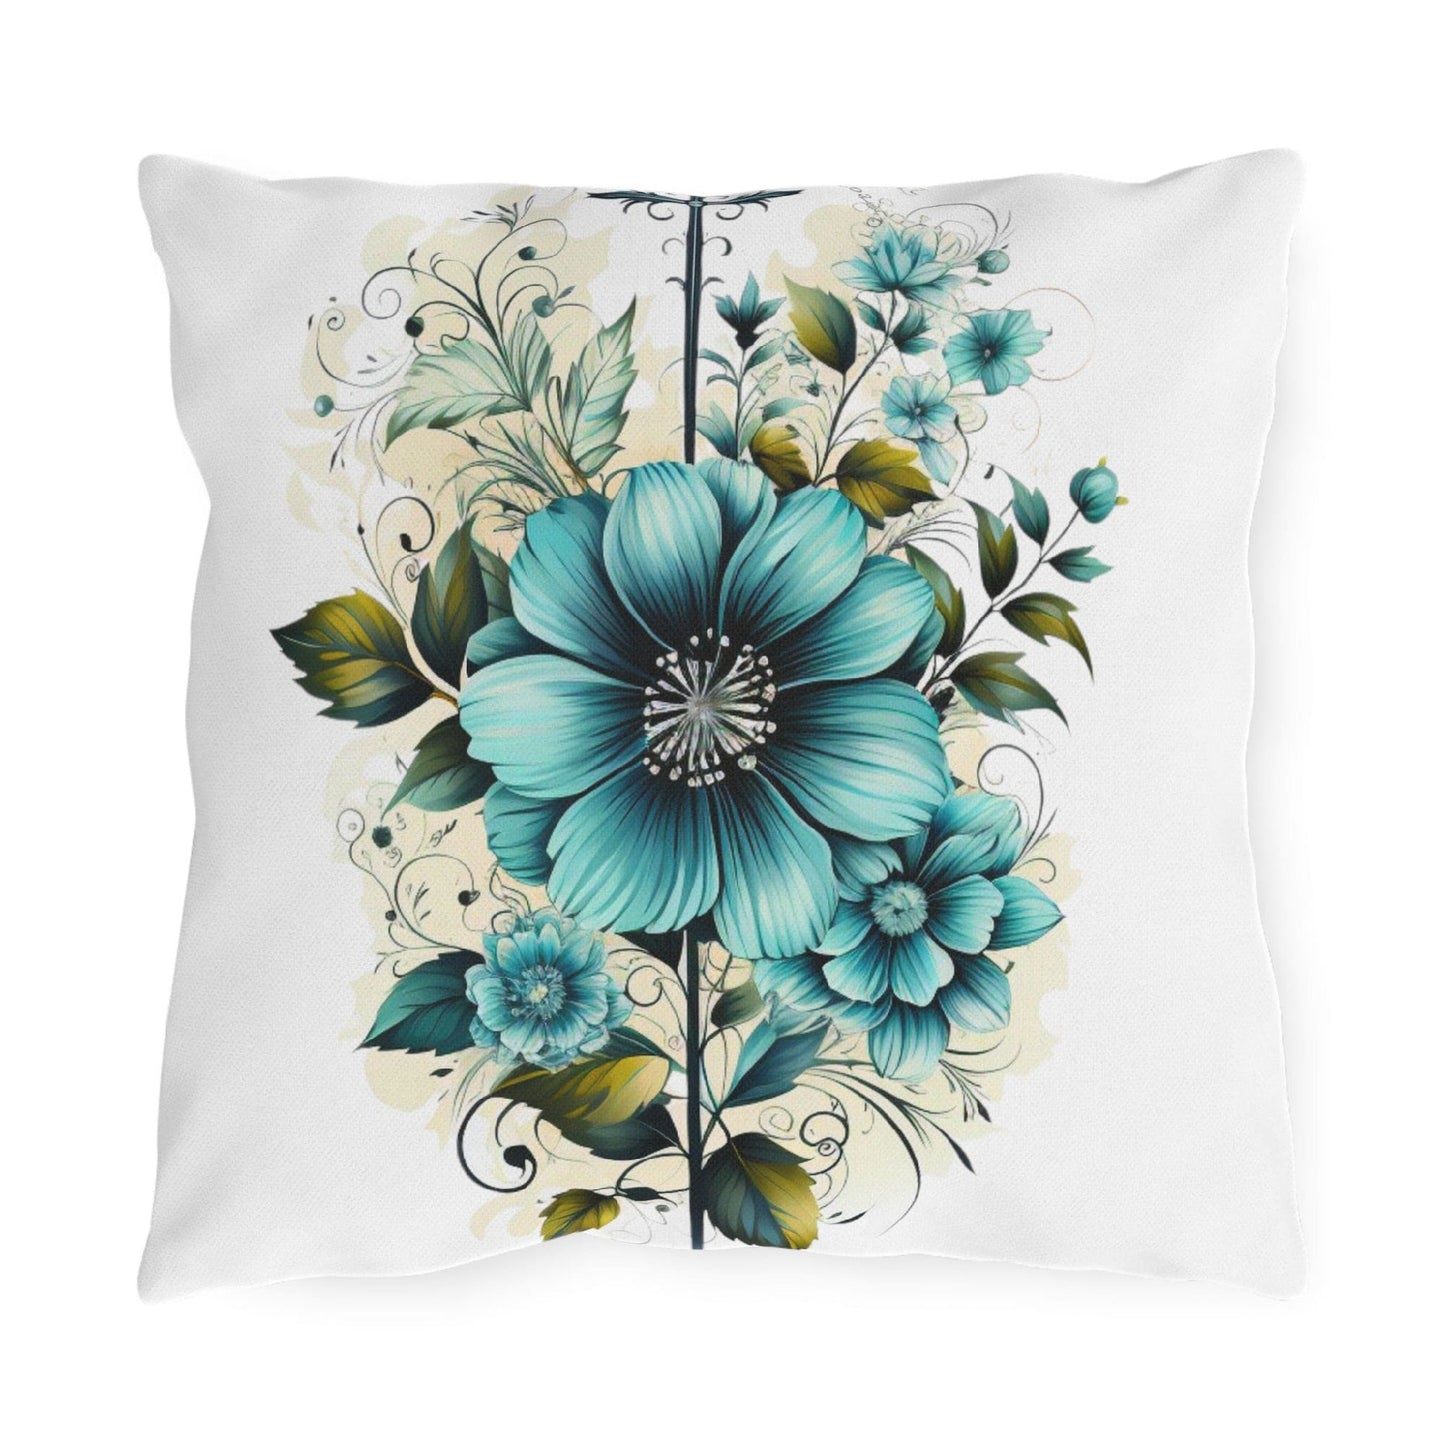 Decorative Outdoor Pillows With Zipper - Set Of 2